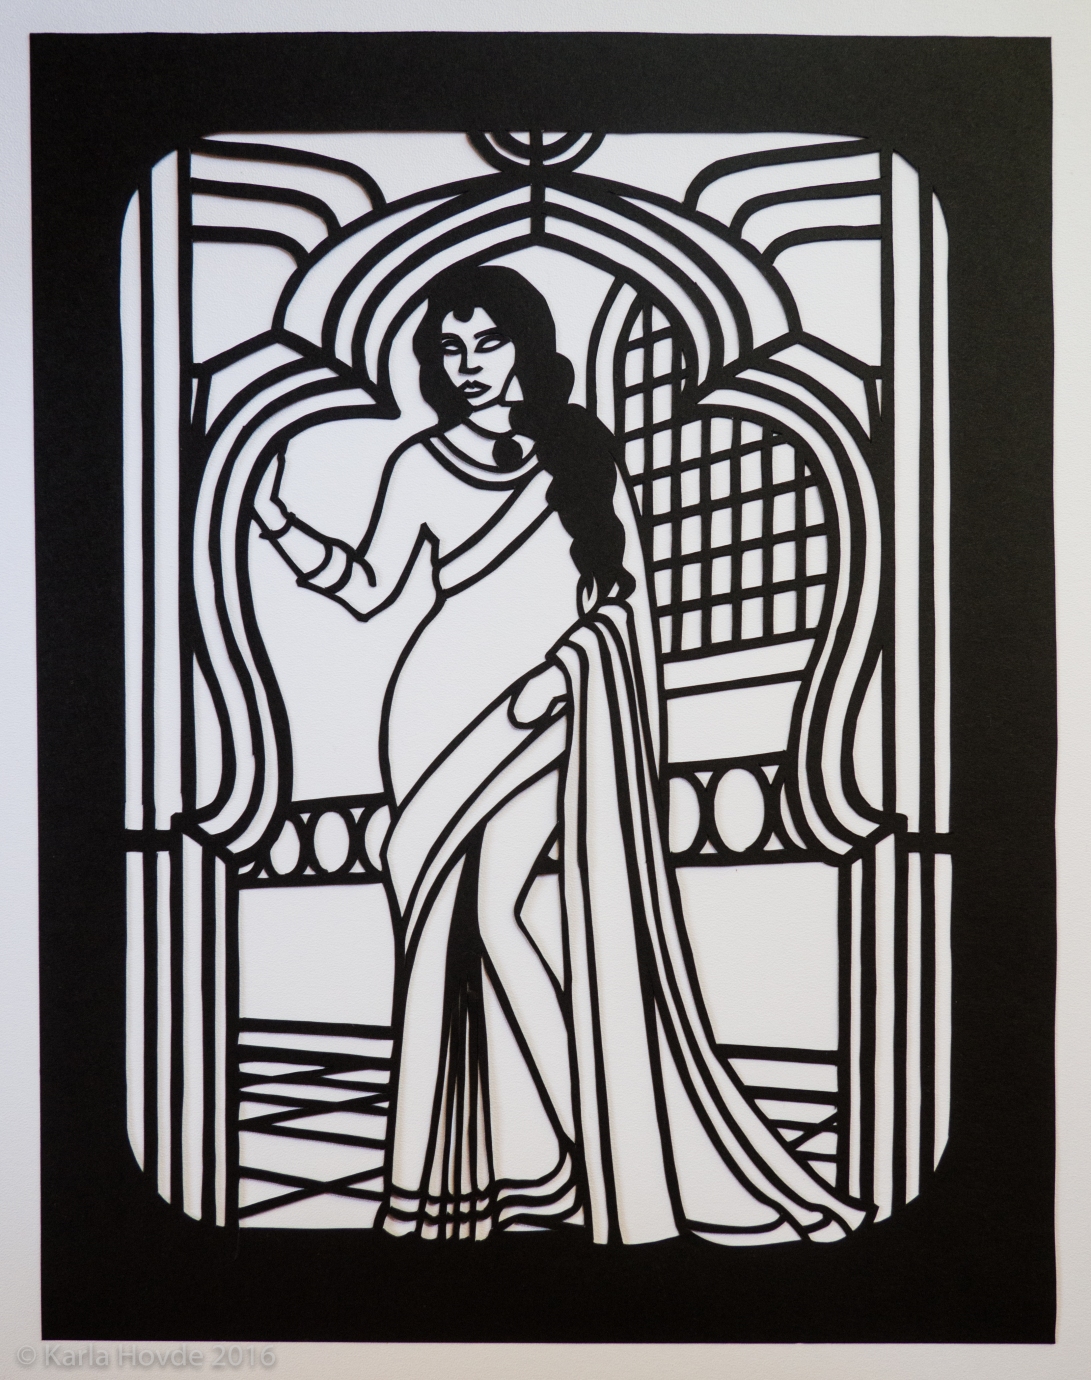 Paper cutting art in black paper shows stylized woman wearing a sari standing in South Asian style doorway arch.